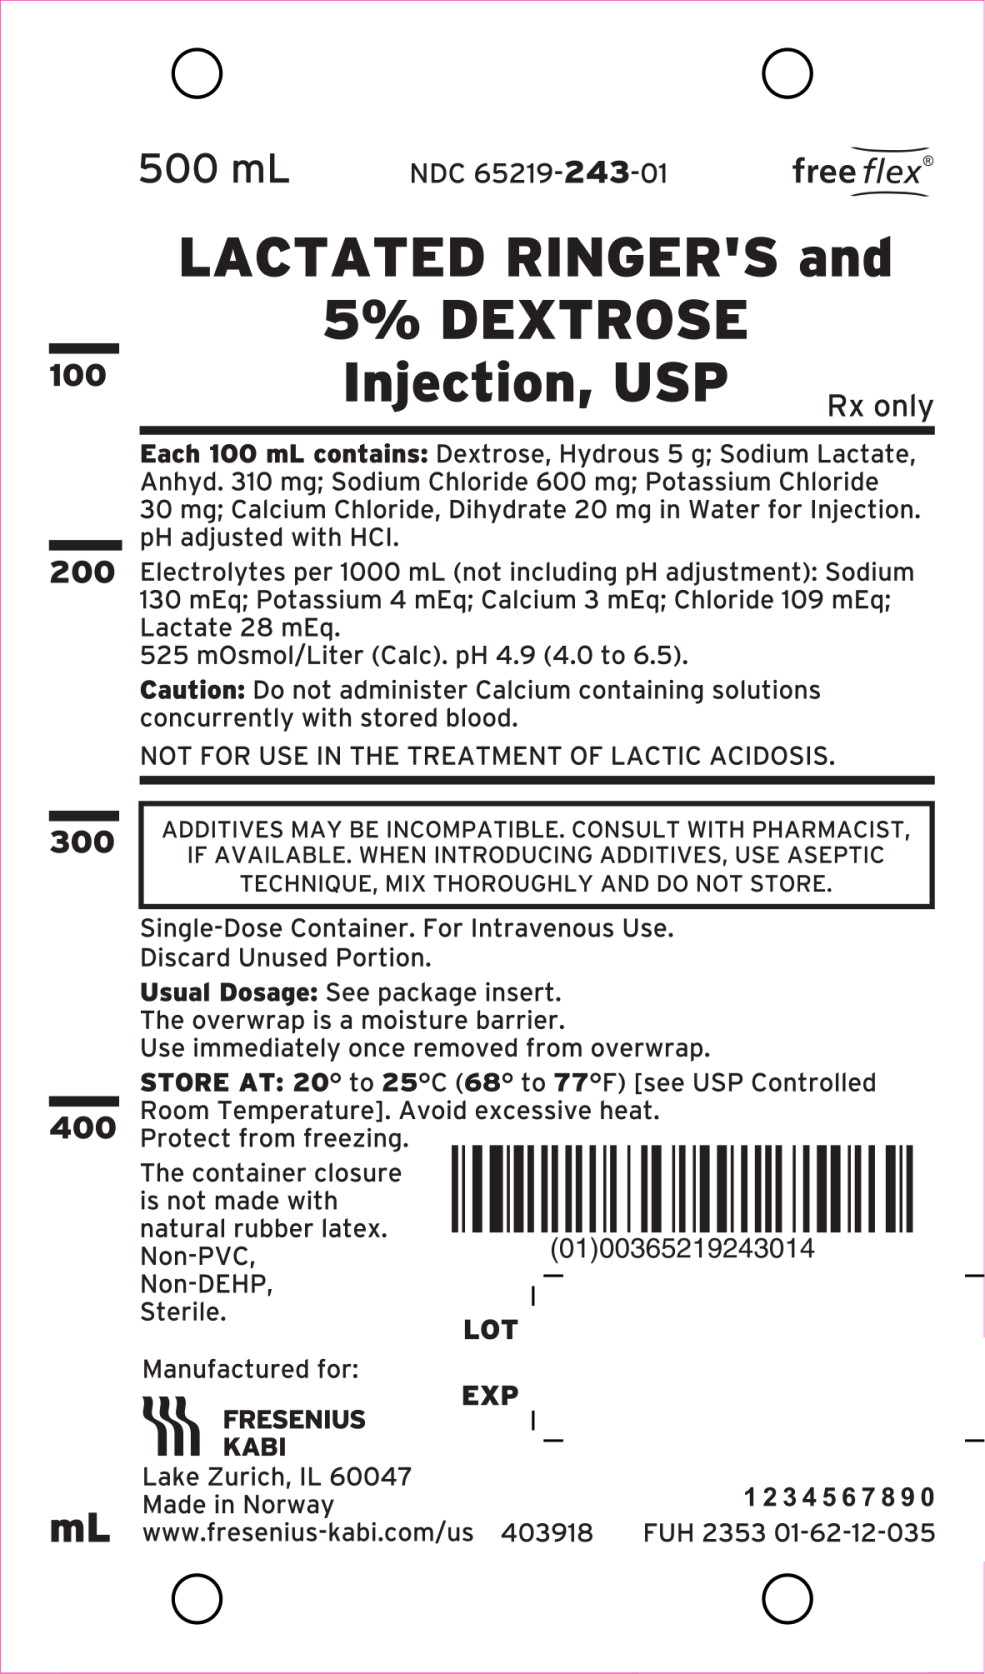 PACKAGE LABEL - PRINCIPAL DISPLAY – Lactated Ringer's and 5% Dextrose Injection, USP 500 mL Bag Label
